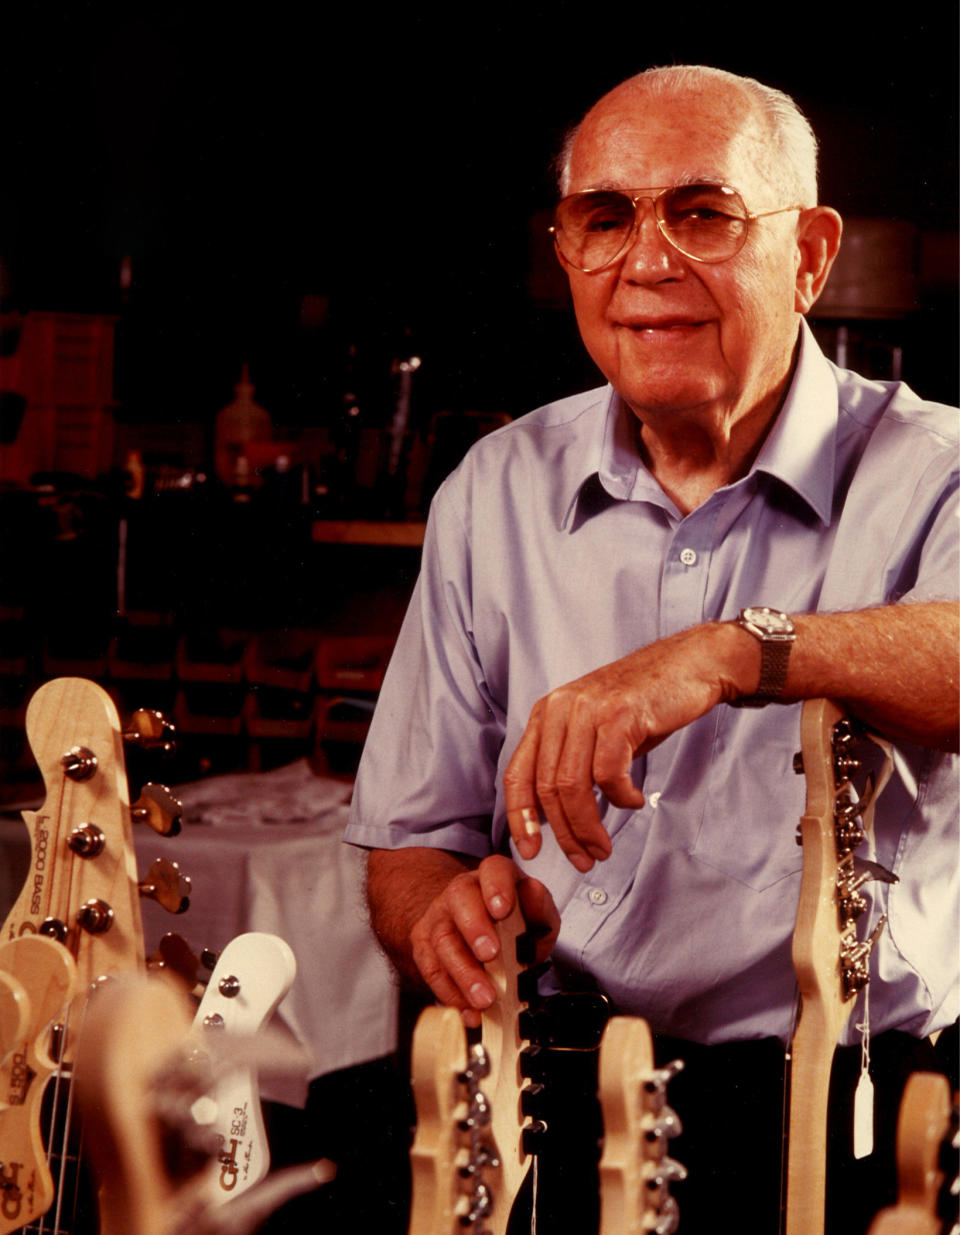 Leo Fender poses with G&L Guitars